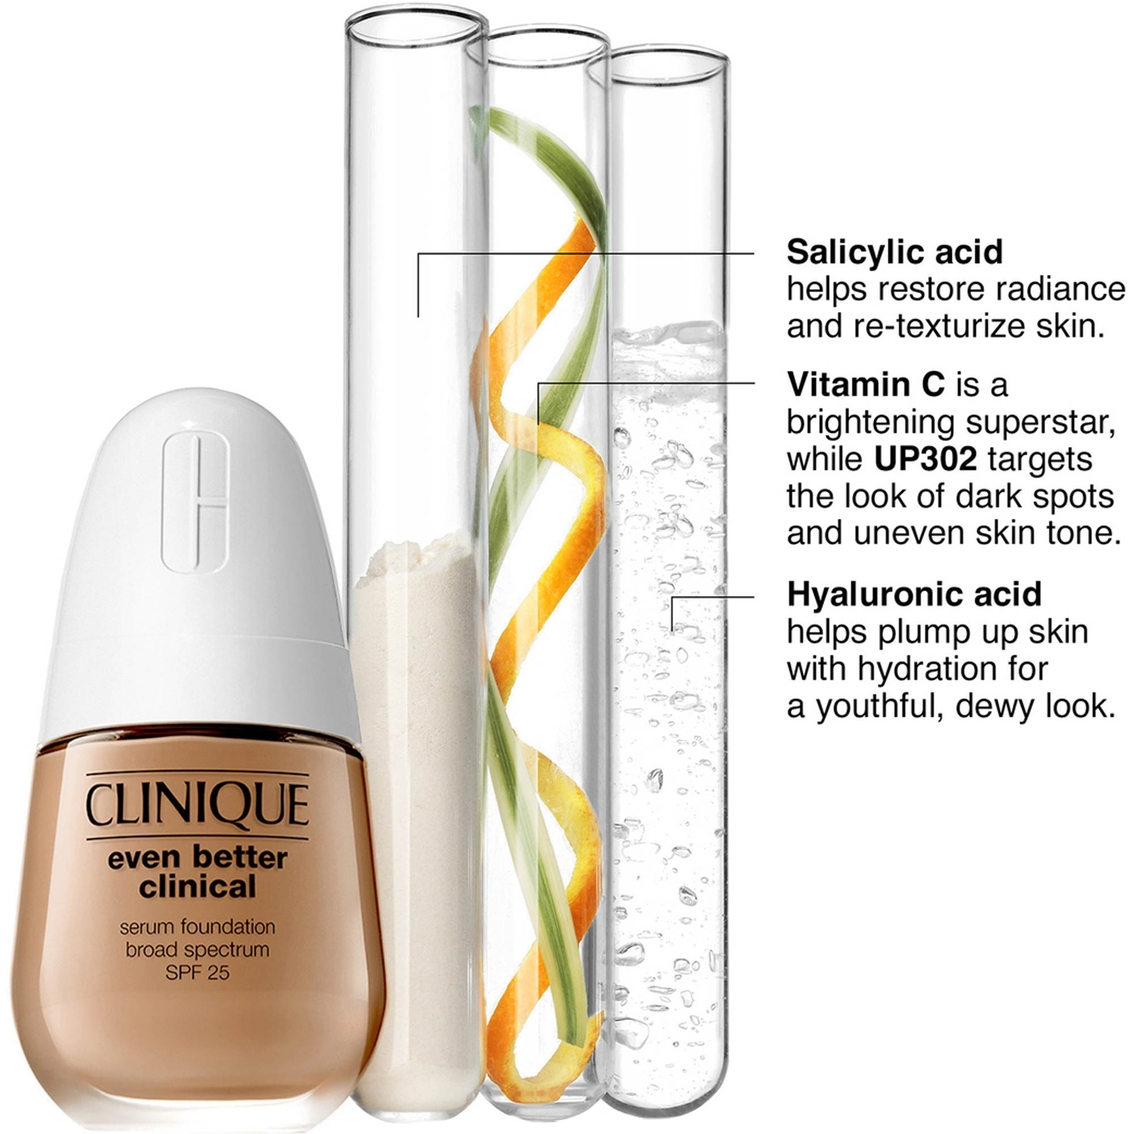 Clinique Even Better Clinical Serum Foundation Broad Spectrum SPF 25 - Image 5 of 10